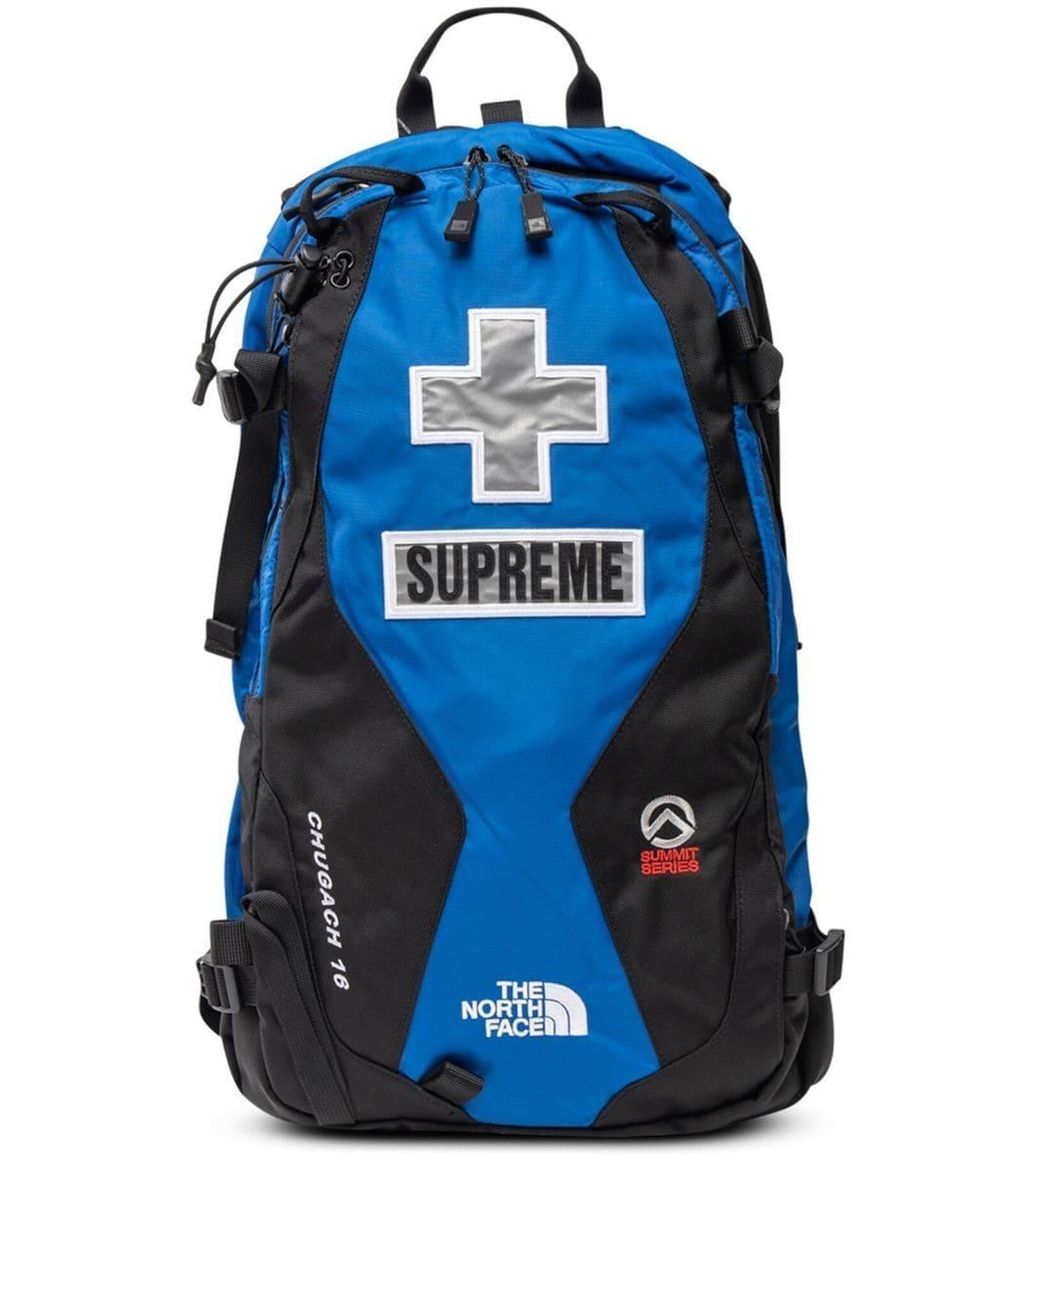 Supreme X Tnf Summit Series Rescue Chugach 16 Backpack in Blue | Lyst